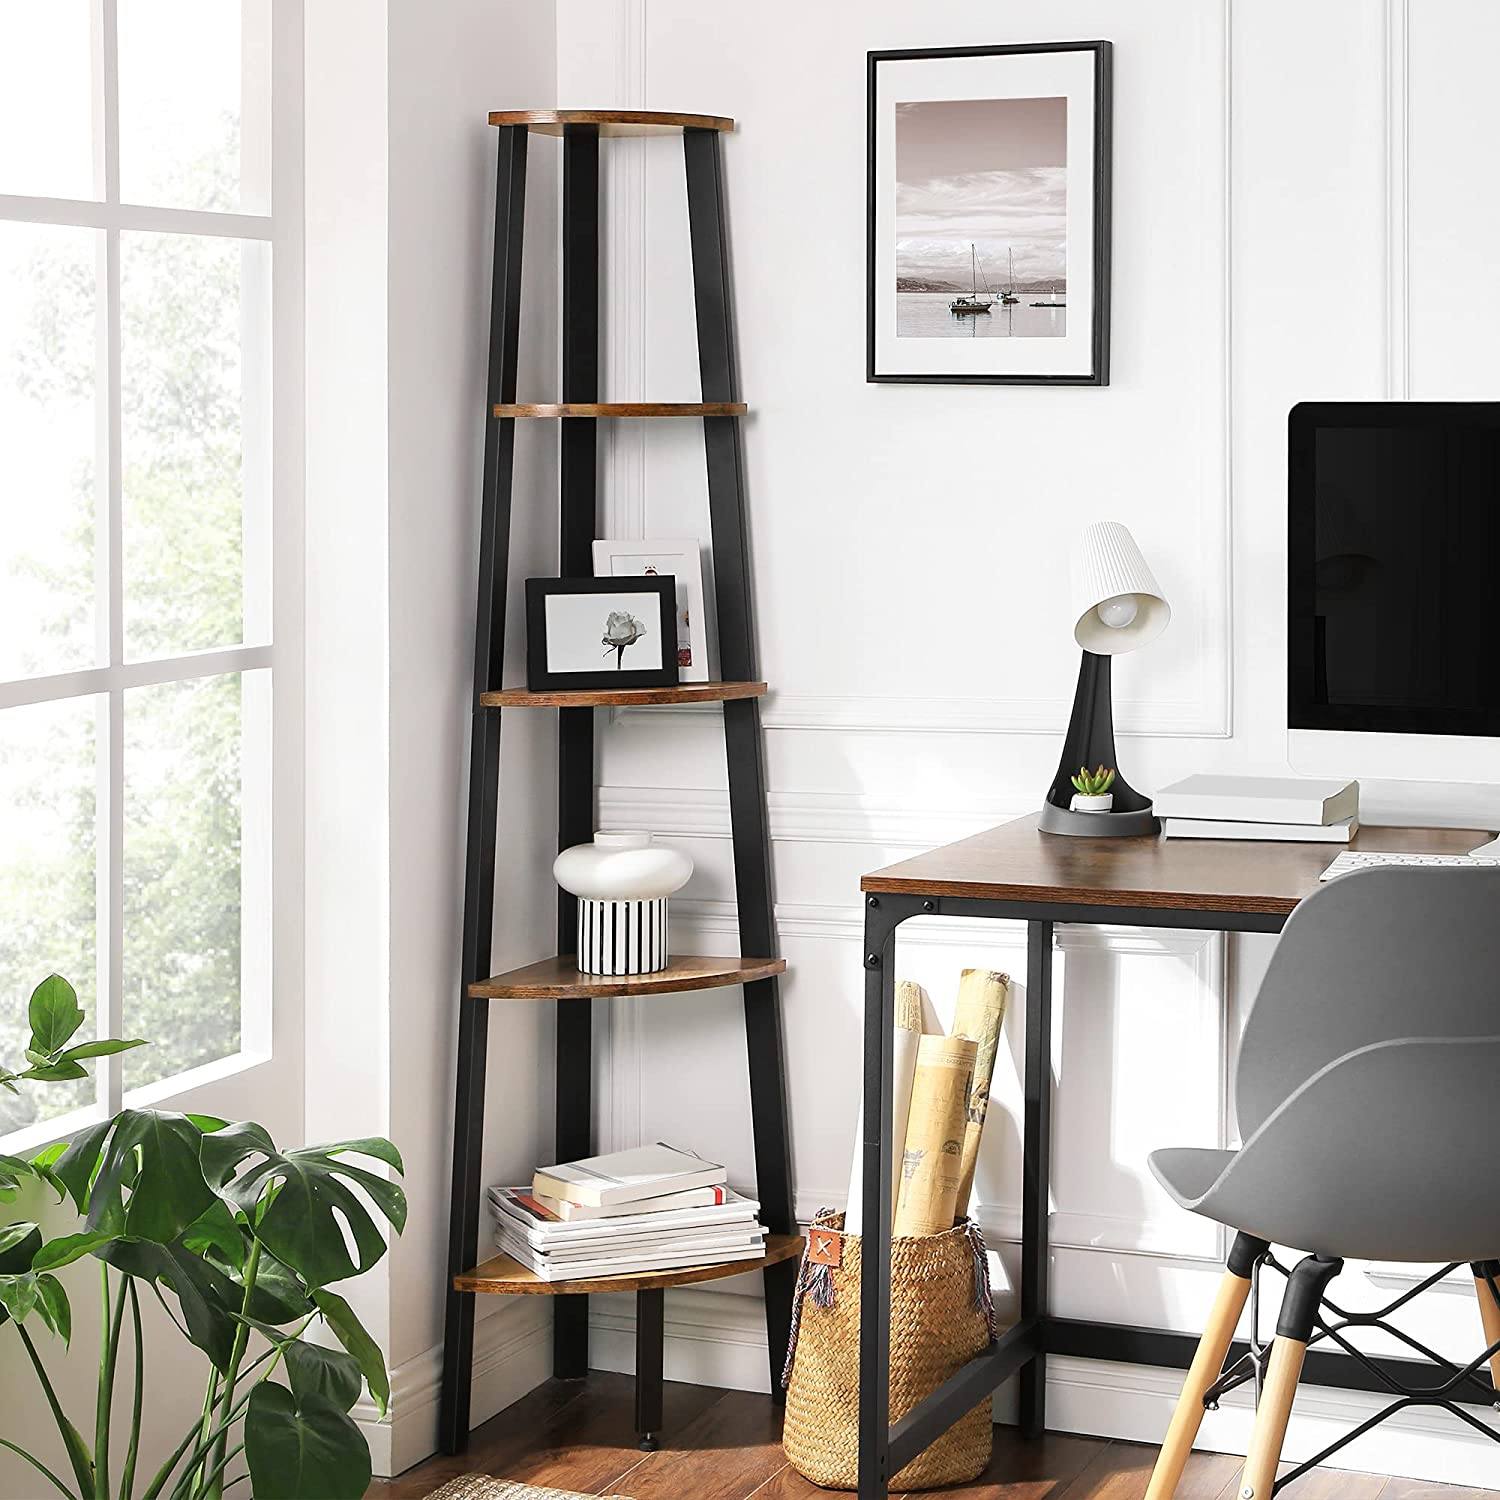 Corner Shelf, 5-Tier Industrial Ladder Bookcase, Storage Rack, with metal Frame, for Living Room, Home, Office, Rustic Brown LLS35X RAW58.dk 